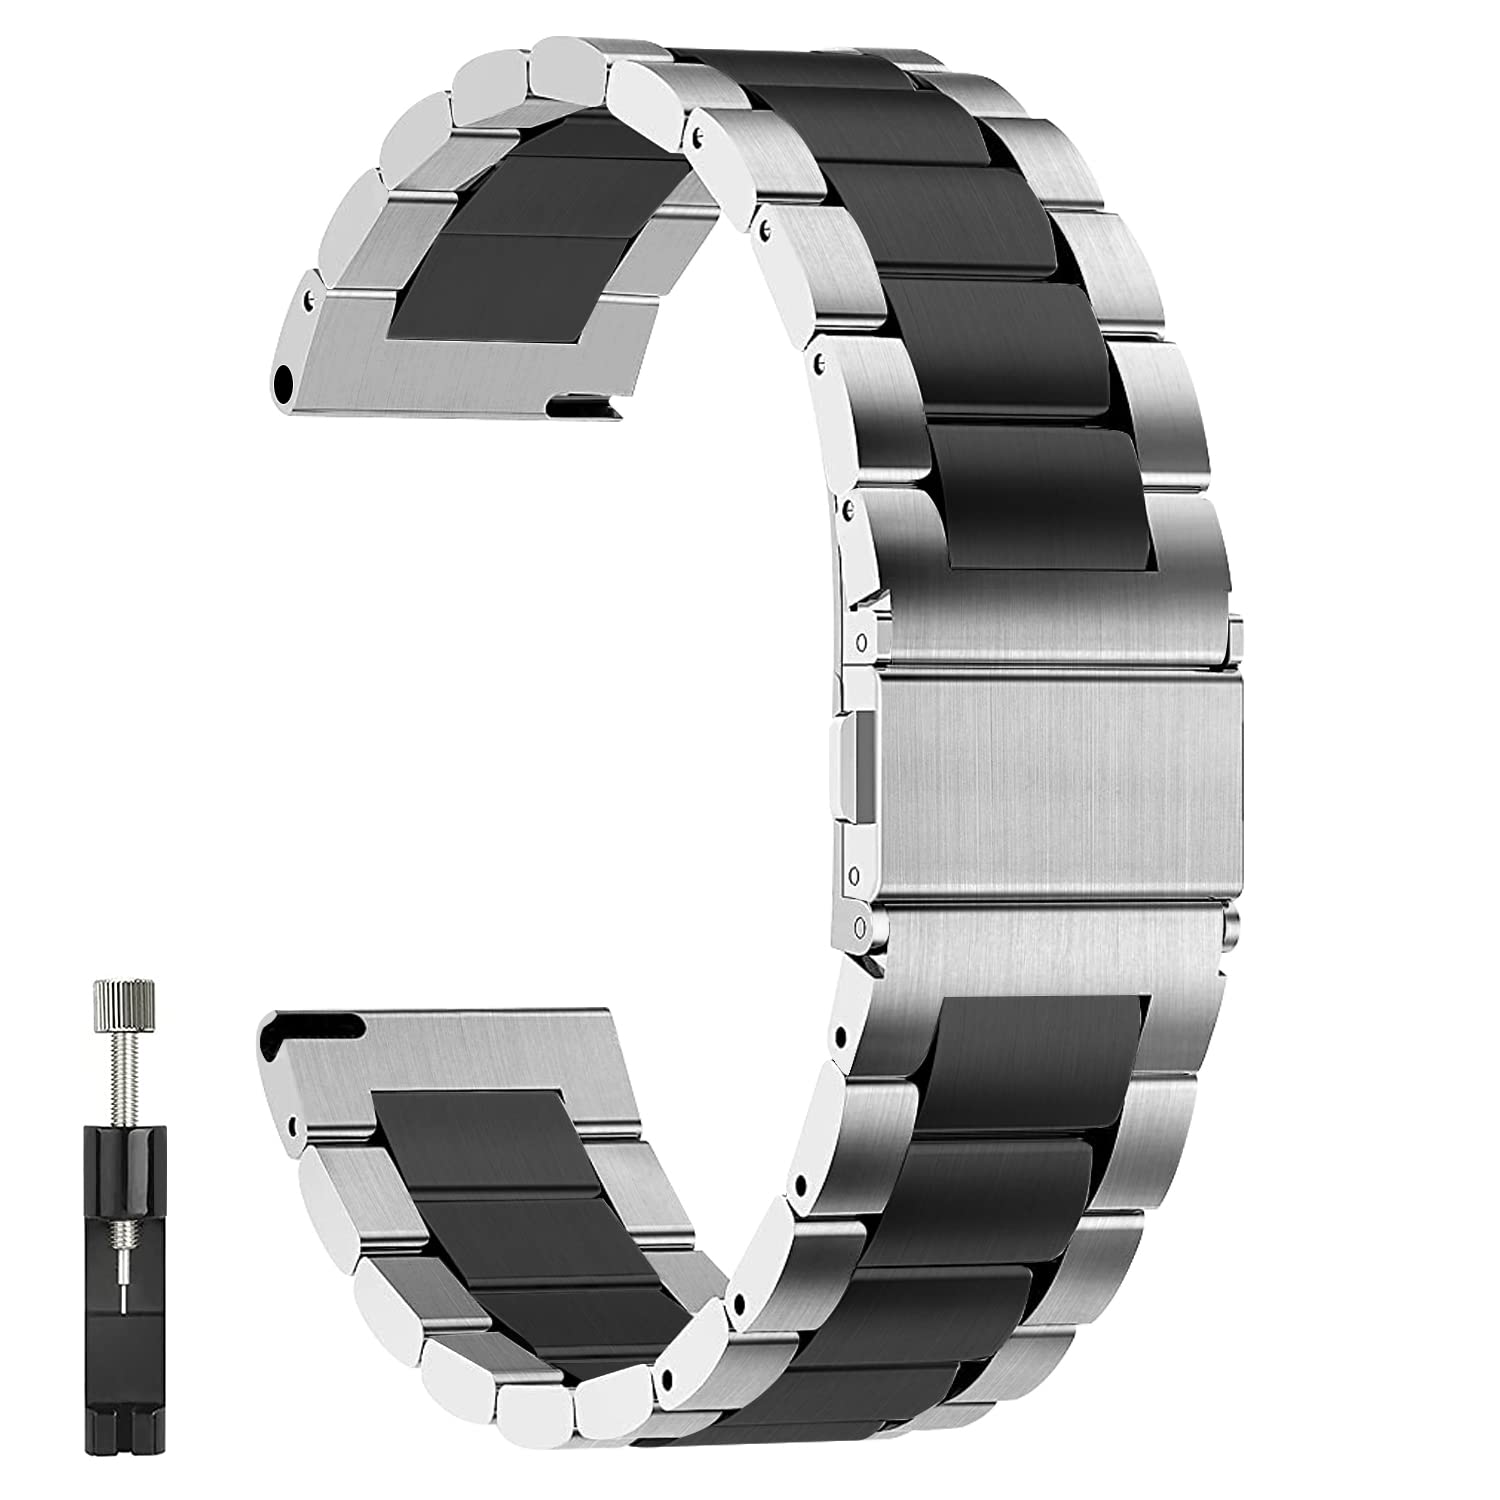 QUNDAXI Watch Band 14mm 16mm 18mm 20mm 22mm 24mm luxury Stainless steel metal Quick Release Watch Bands for Men and Women